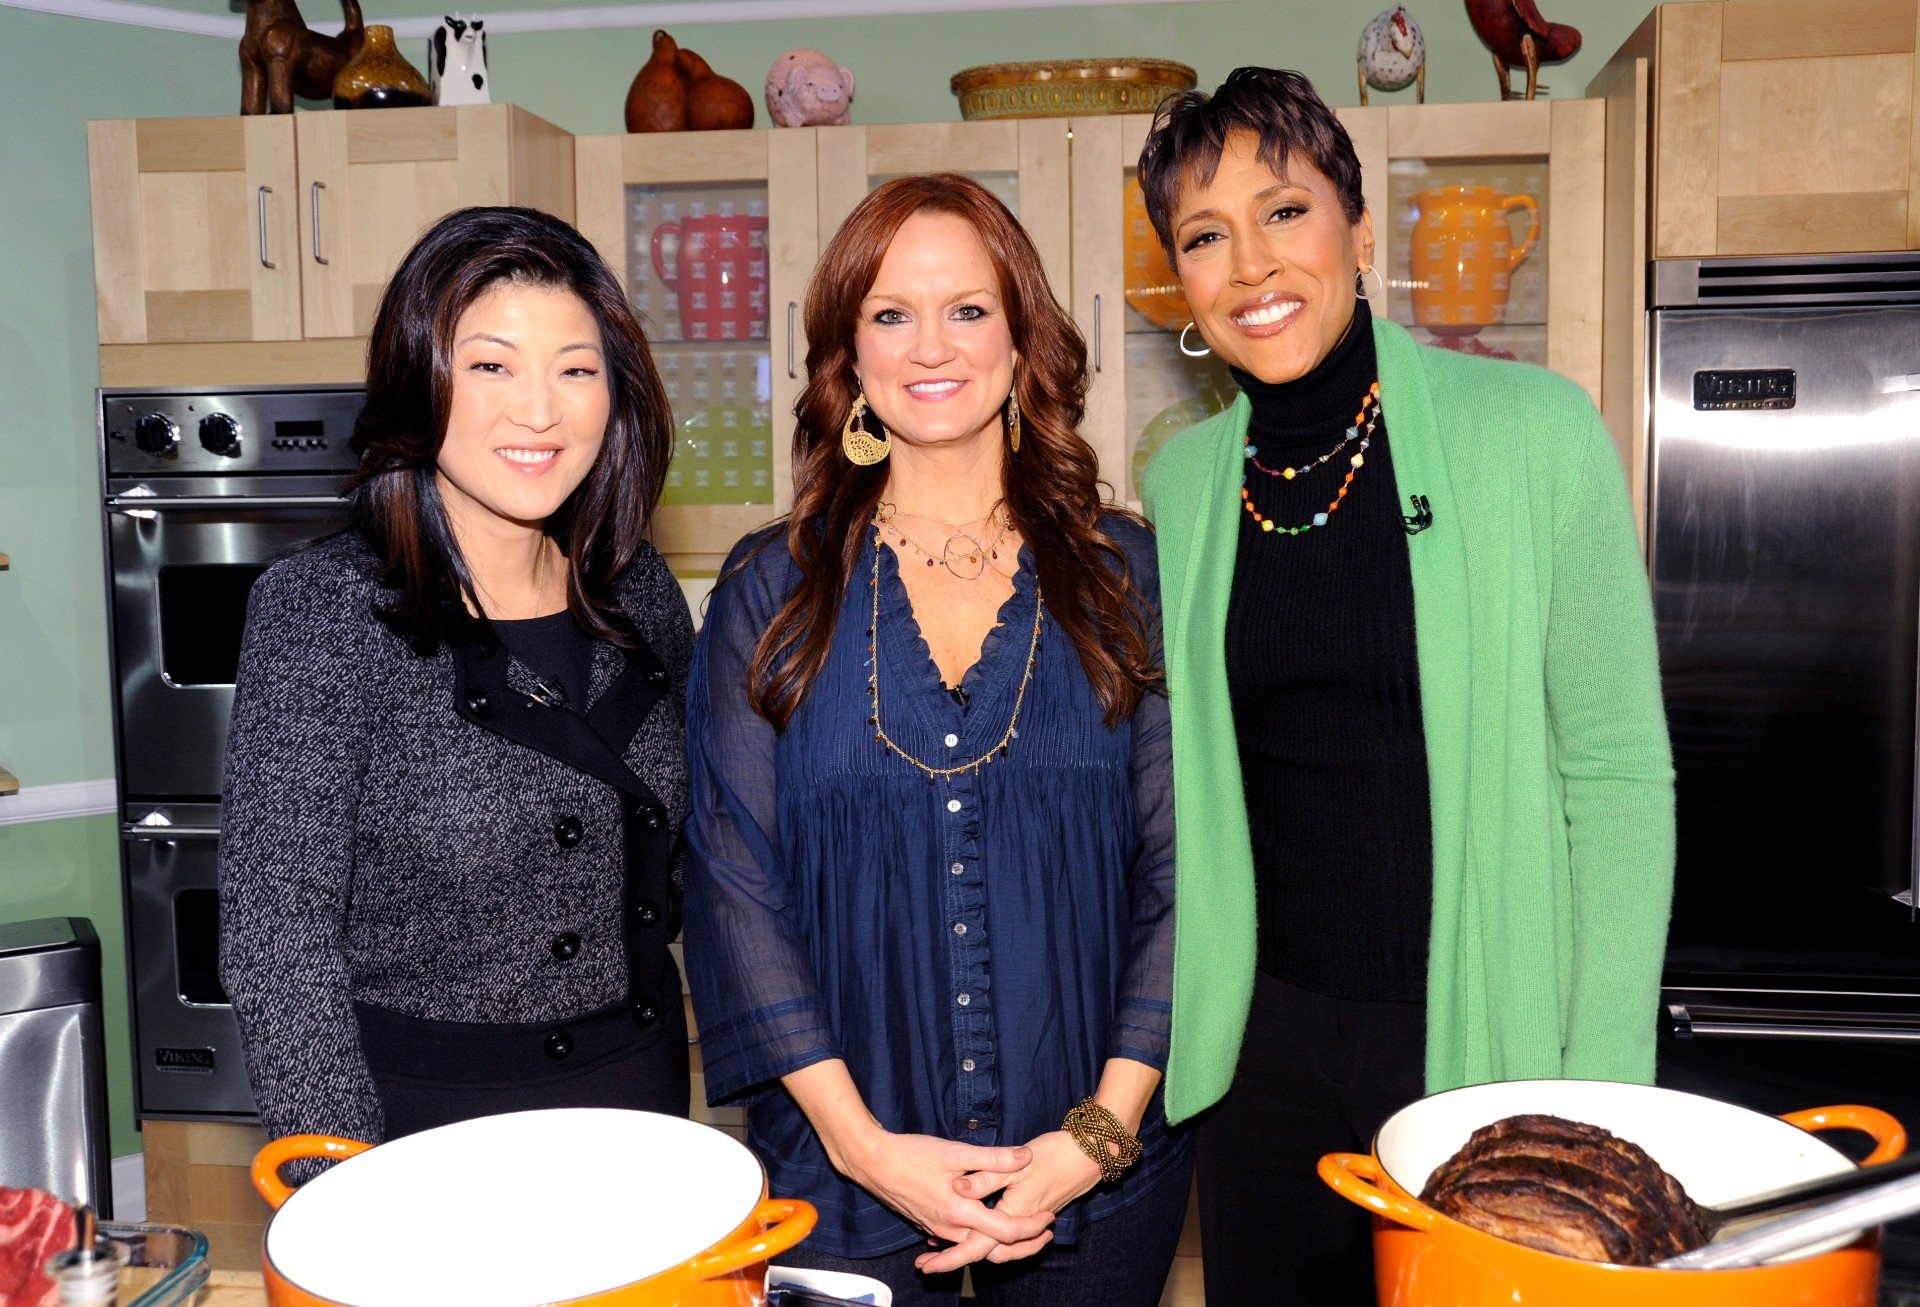 The Pioneer Woman Ree Drummond with JuJu Chang and Robin Roberts.